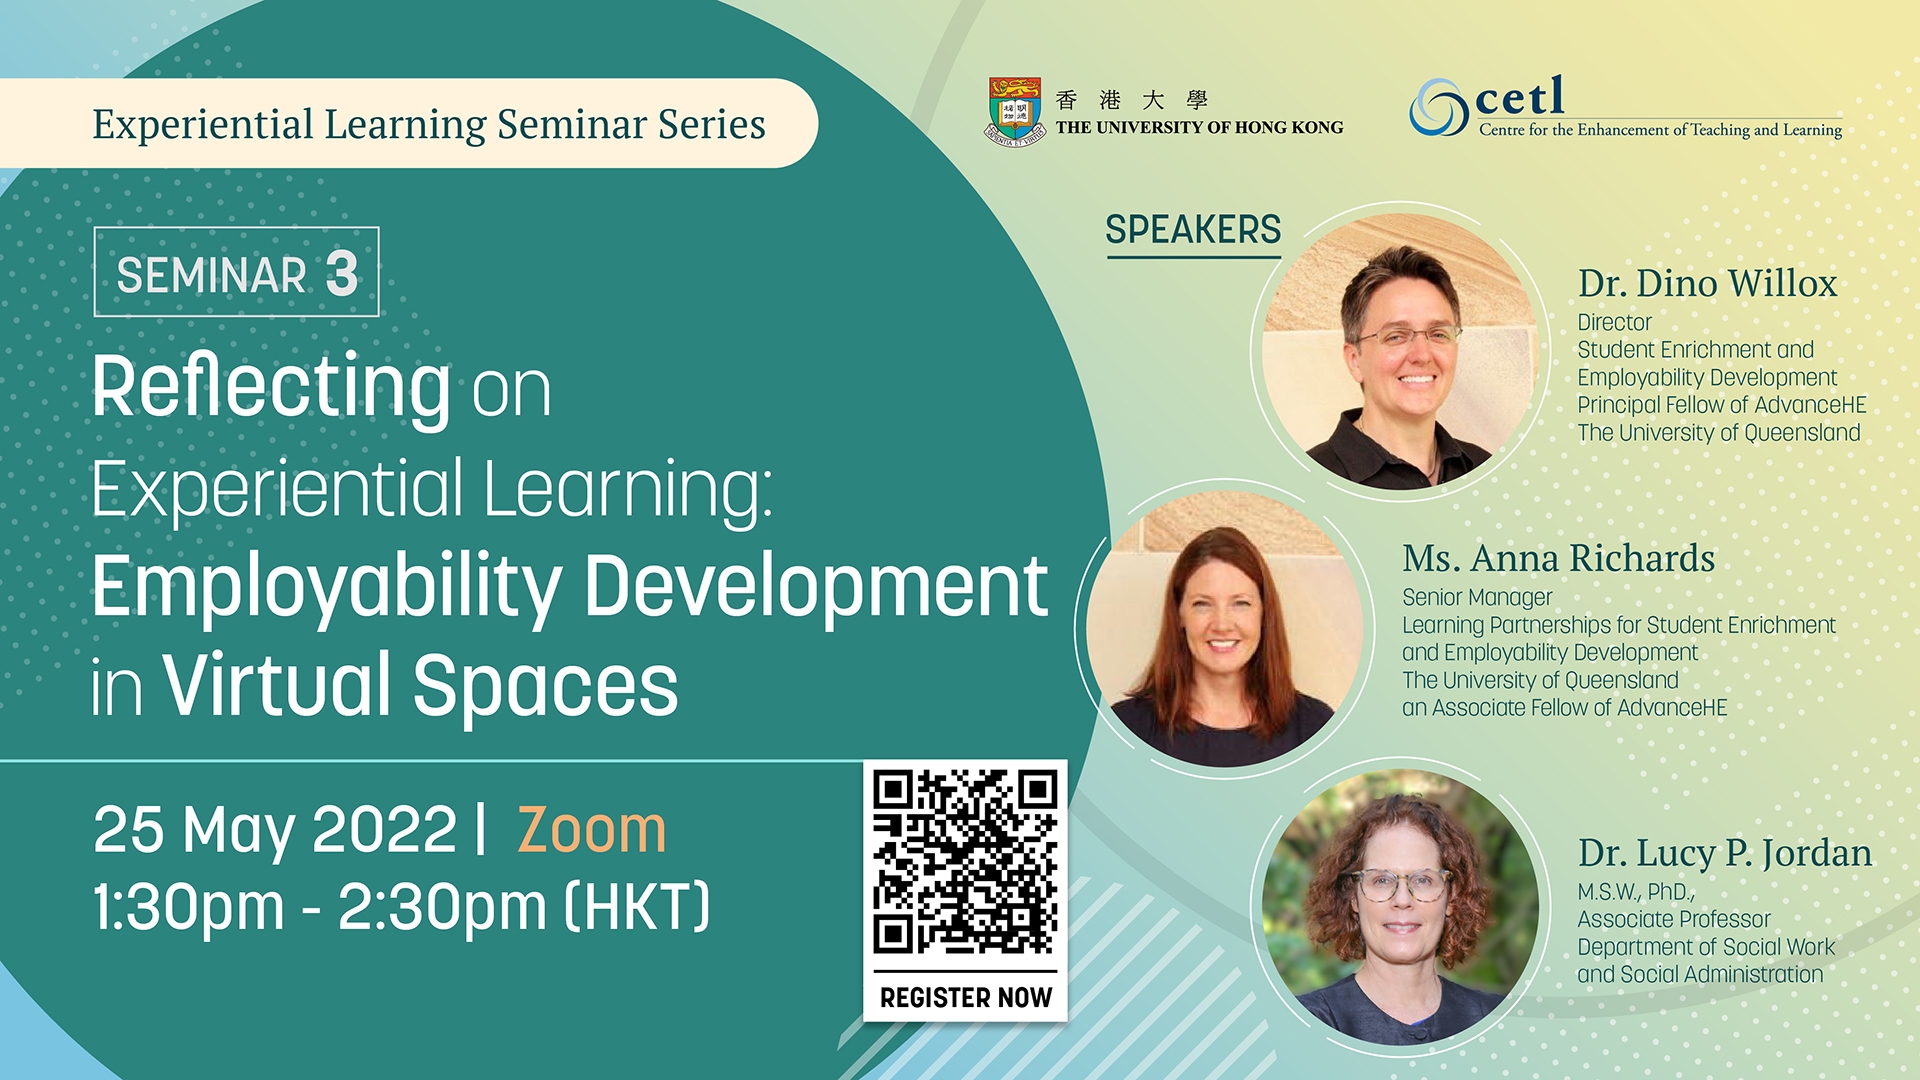 Seminar 3 - Reflecting on Experiential Learning: Employability Development in Virtual Spaces